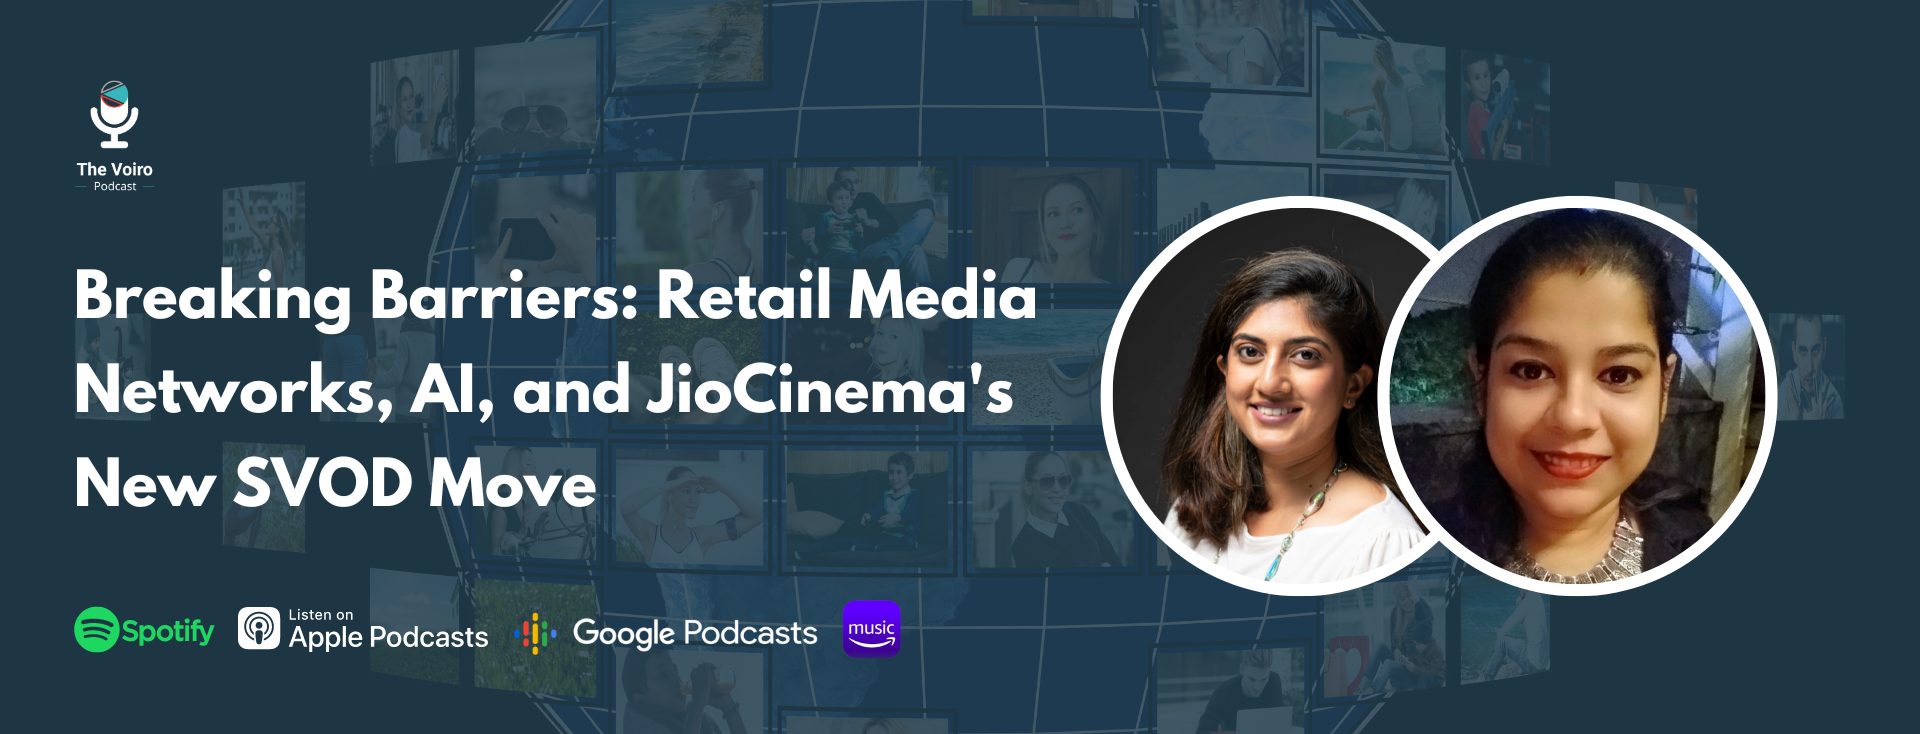 Breaking Barriers: Retail Media Networks, AI, and JioCinema's New SVOD Move